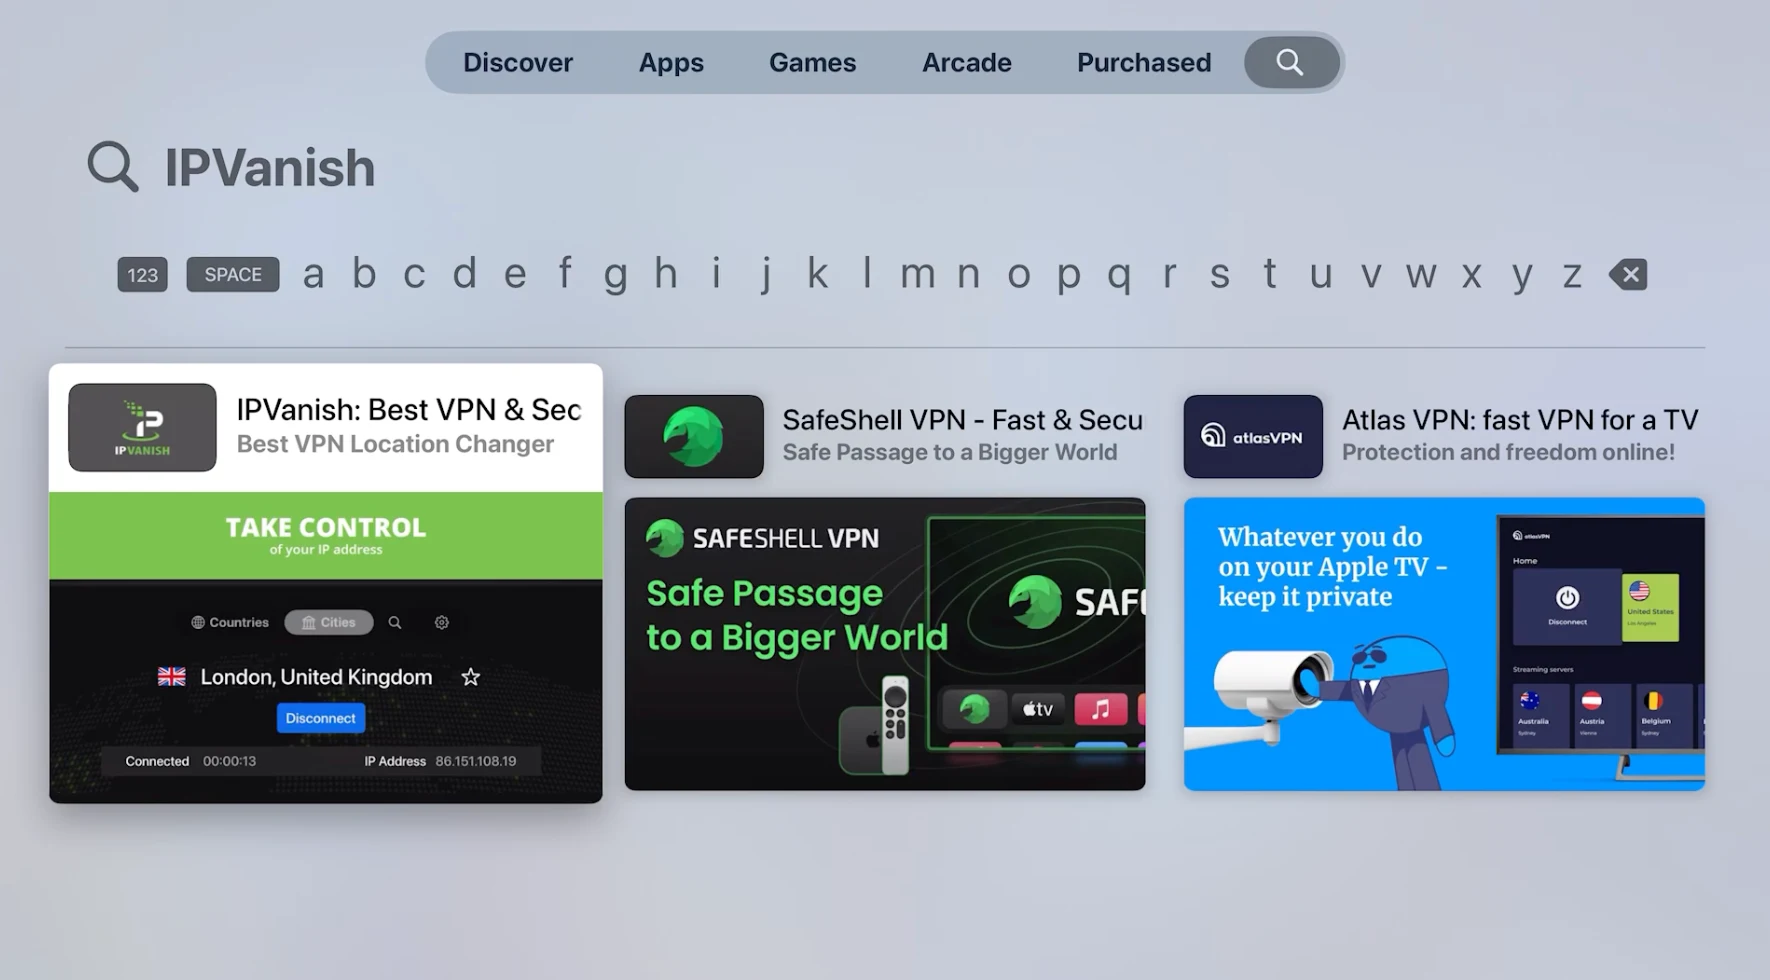 A tvOS app store search screen with the search query "IPVanish" entered. Displayed are various VPN-related apps with IPVanish highlighted, alongside other VPN service apps like SafeShell VPN and Atlas VPN.